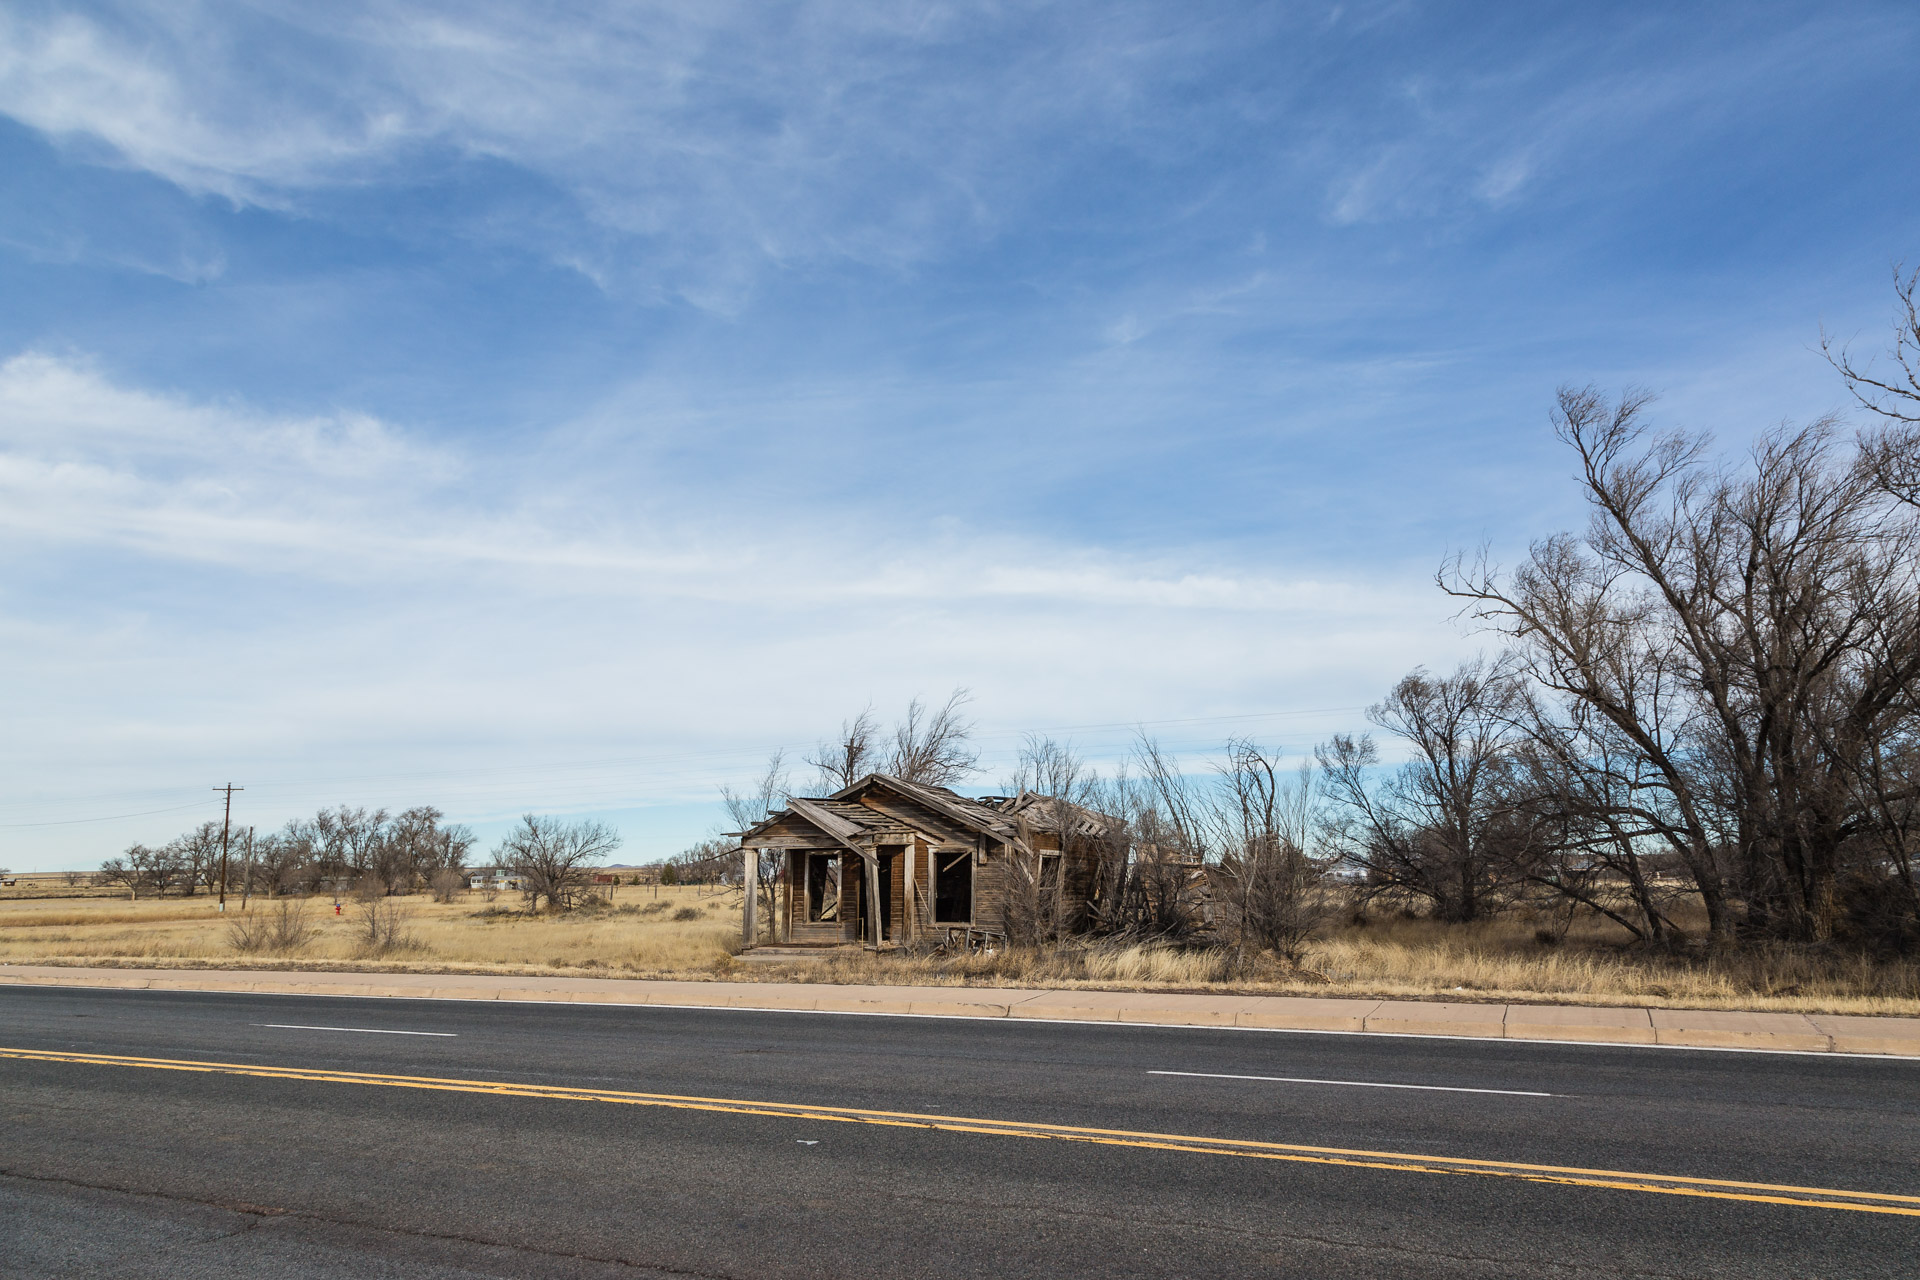 Encino, New Mexico - A Simple Wood House